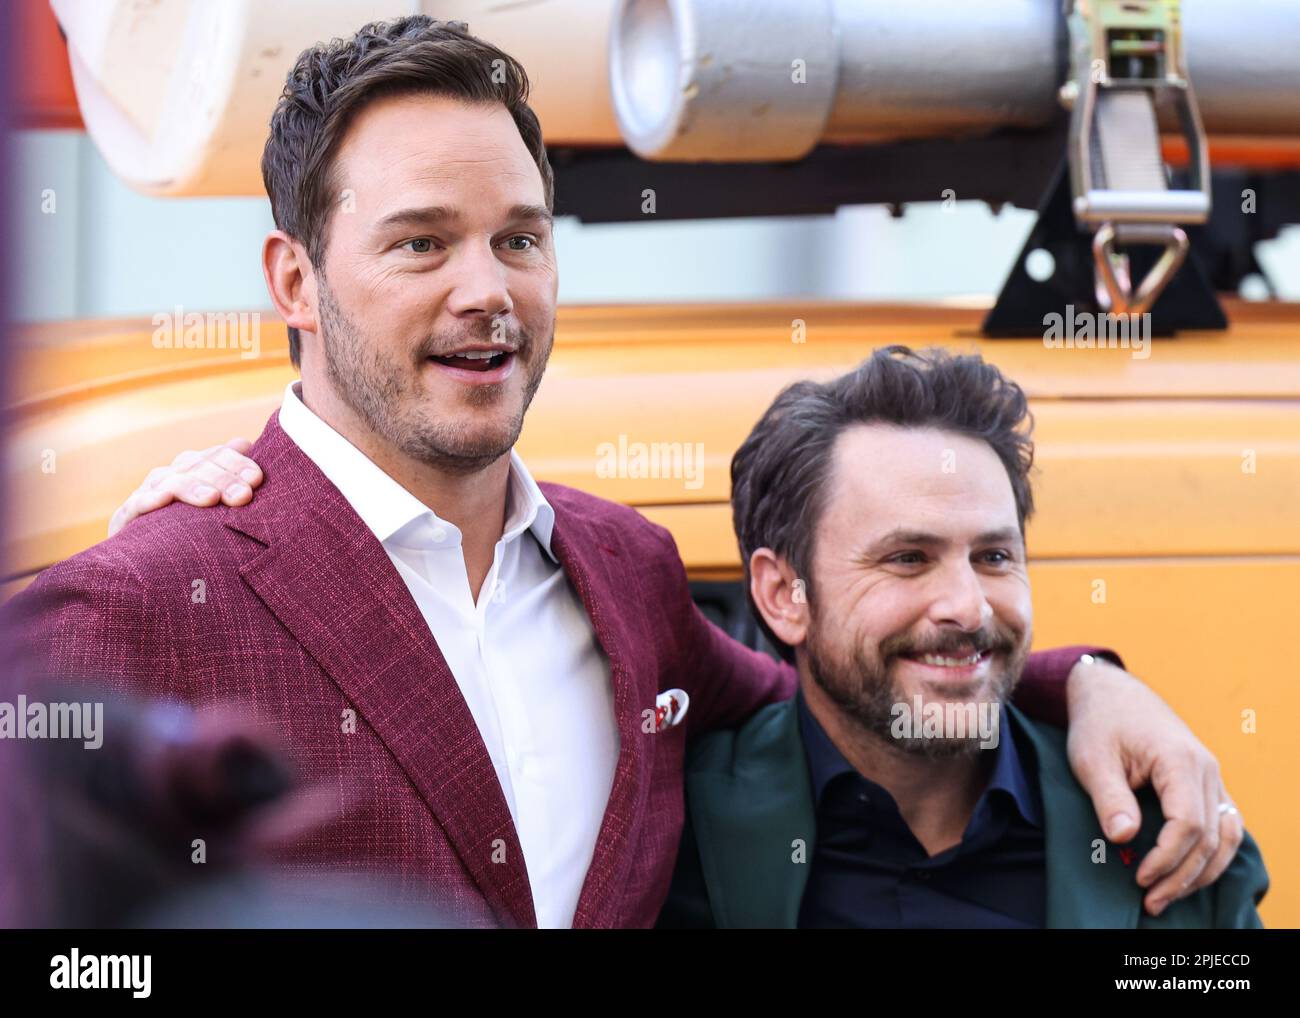 Photo: Shigeru Miyamoto and Charlie Day Attend The Super Mario Bros.  Movie Premiere in Los Angeles - LAP2023040150 